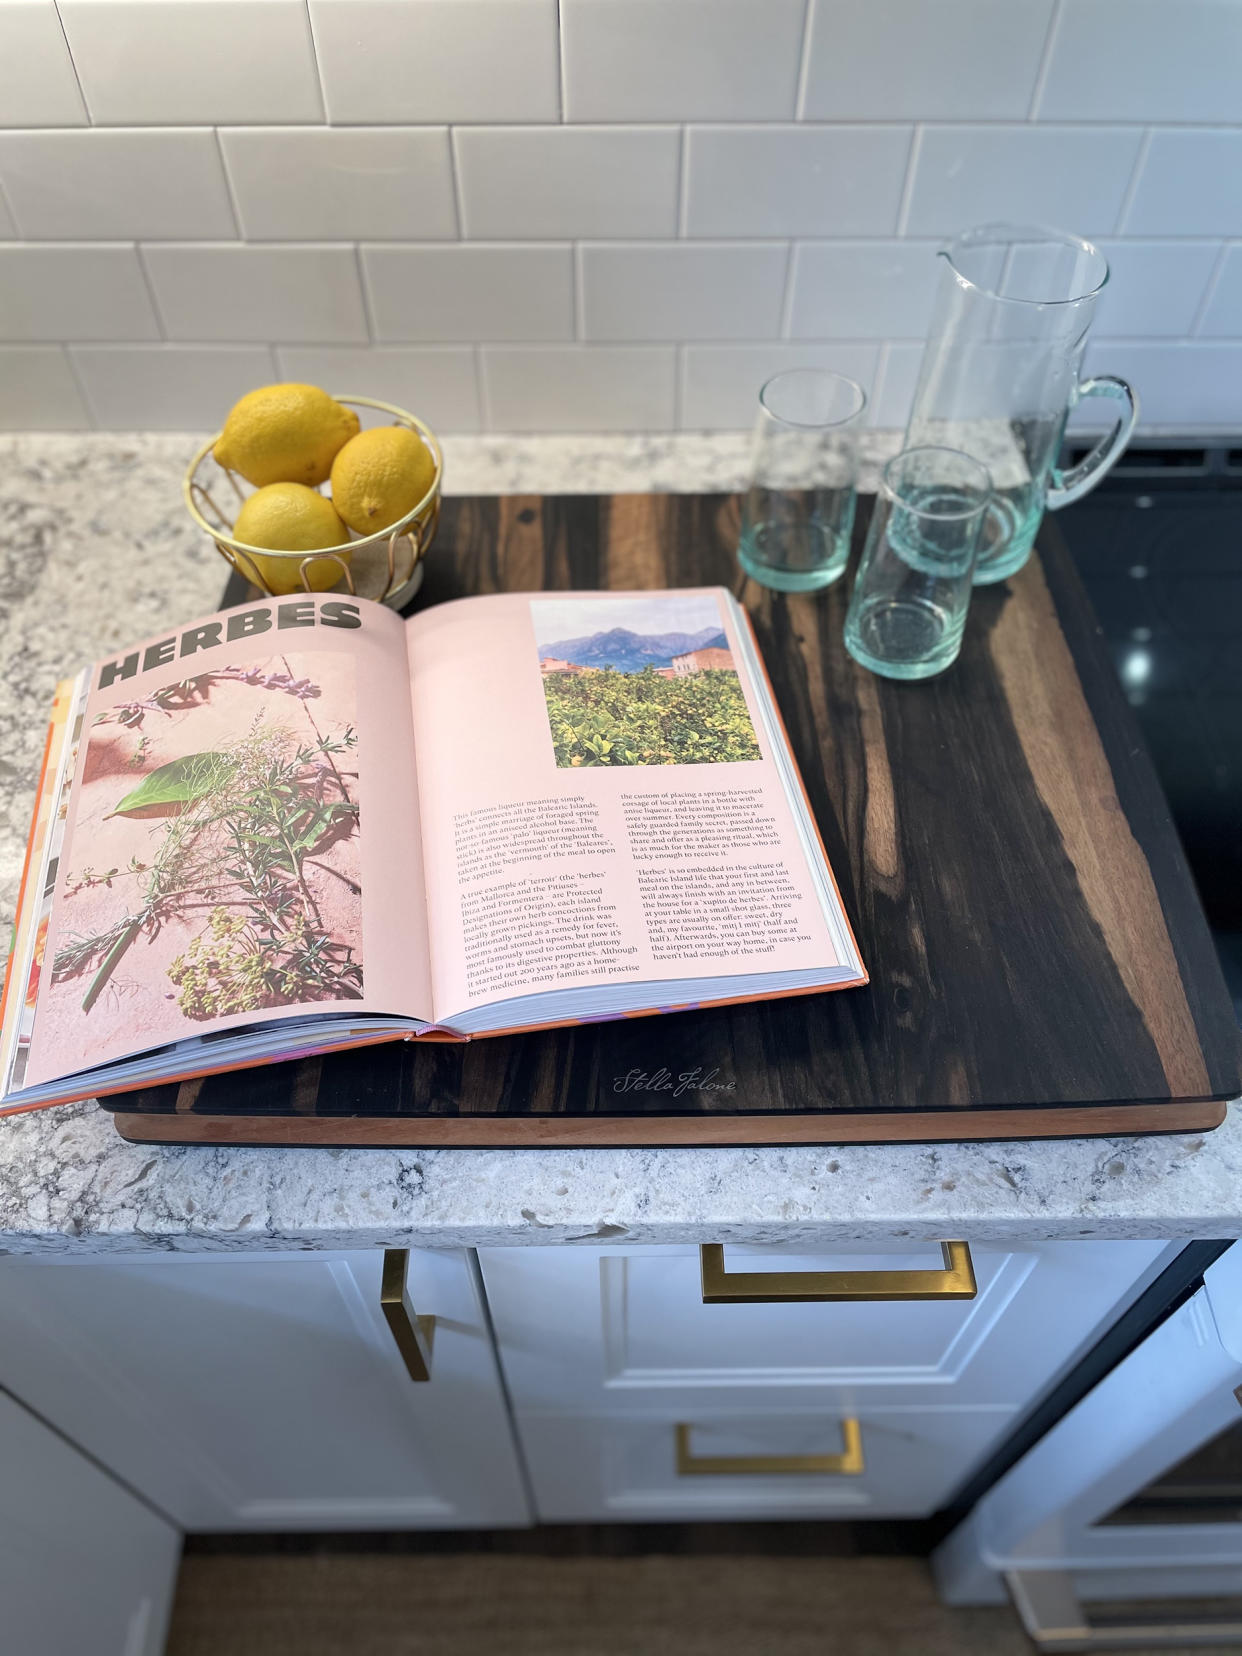 An ebony cutting board made from leftover Taylor guitar parts, a cookbook I found on a memorable day in Brooklyn and handmade Moroccan glassware from Revival helped create warm, personal touches in a clean, modern kitchen. (Erica Chayes Wida)